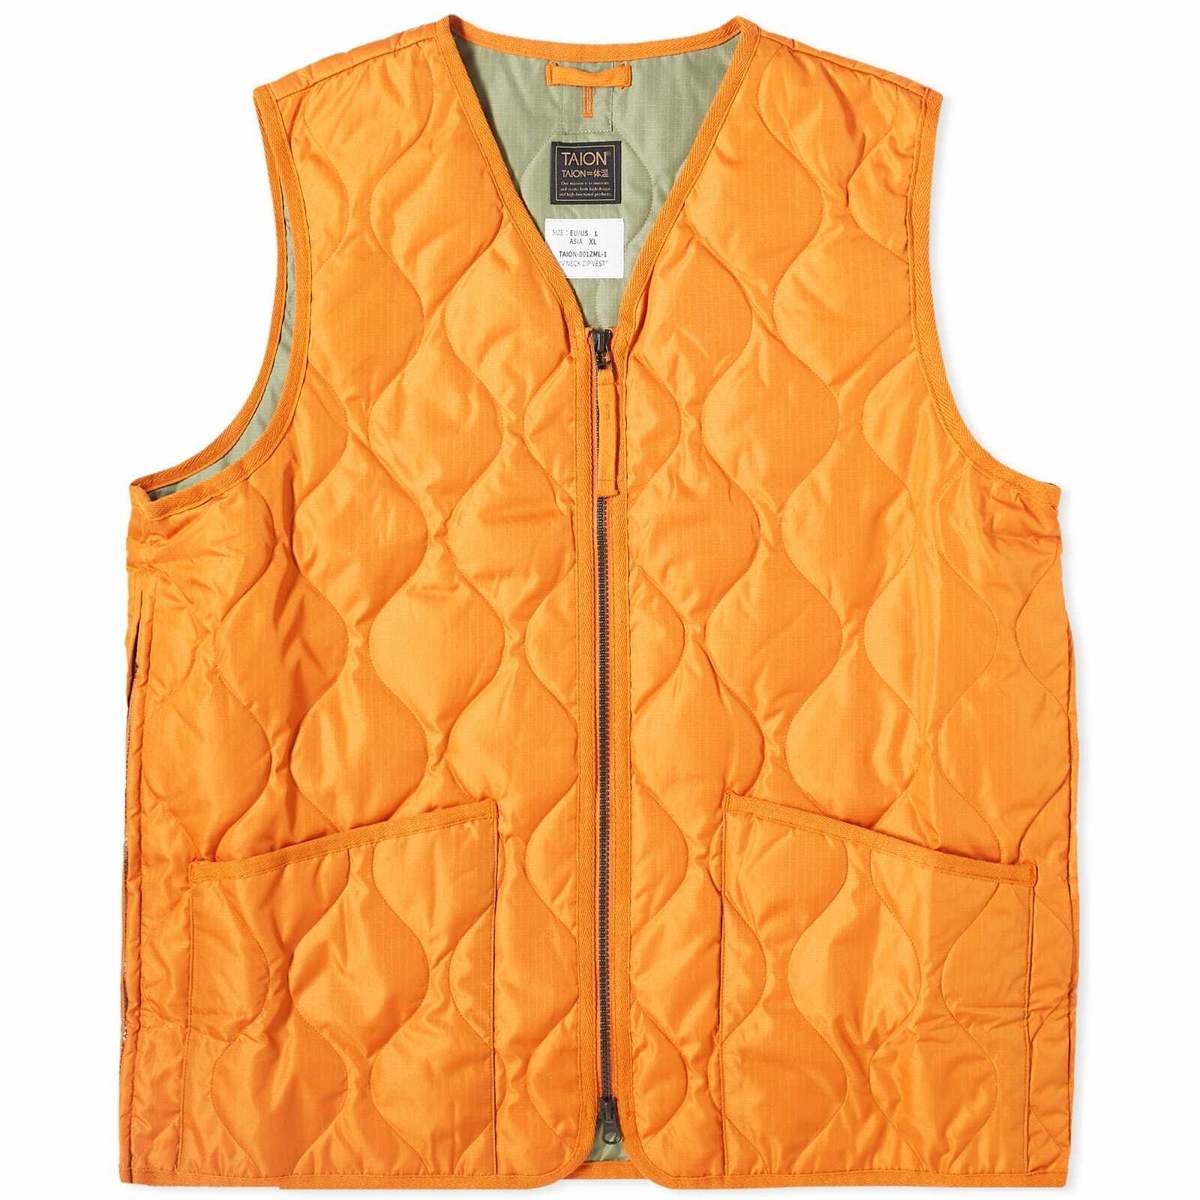 Manors Mens Checkered Vest Black/Grey – Extra Butter